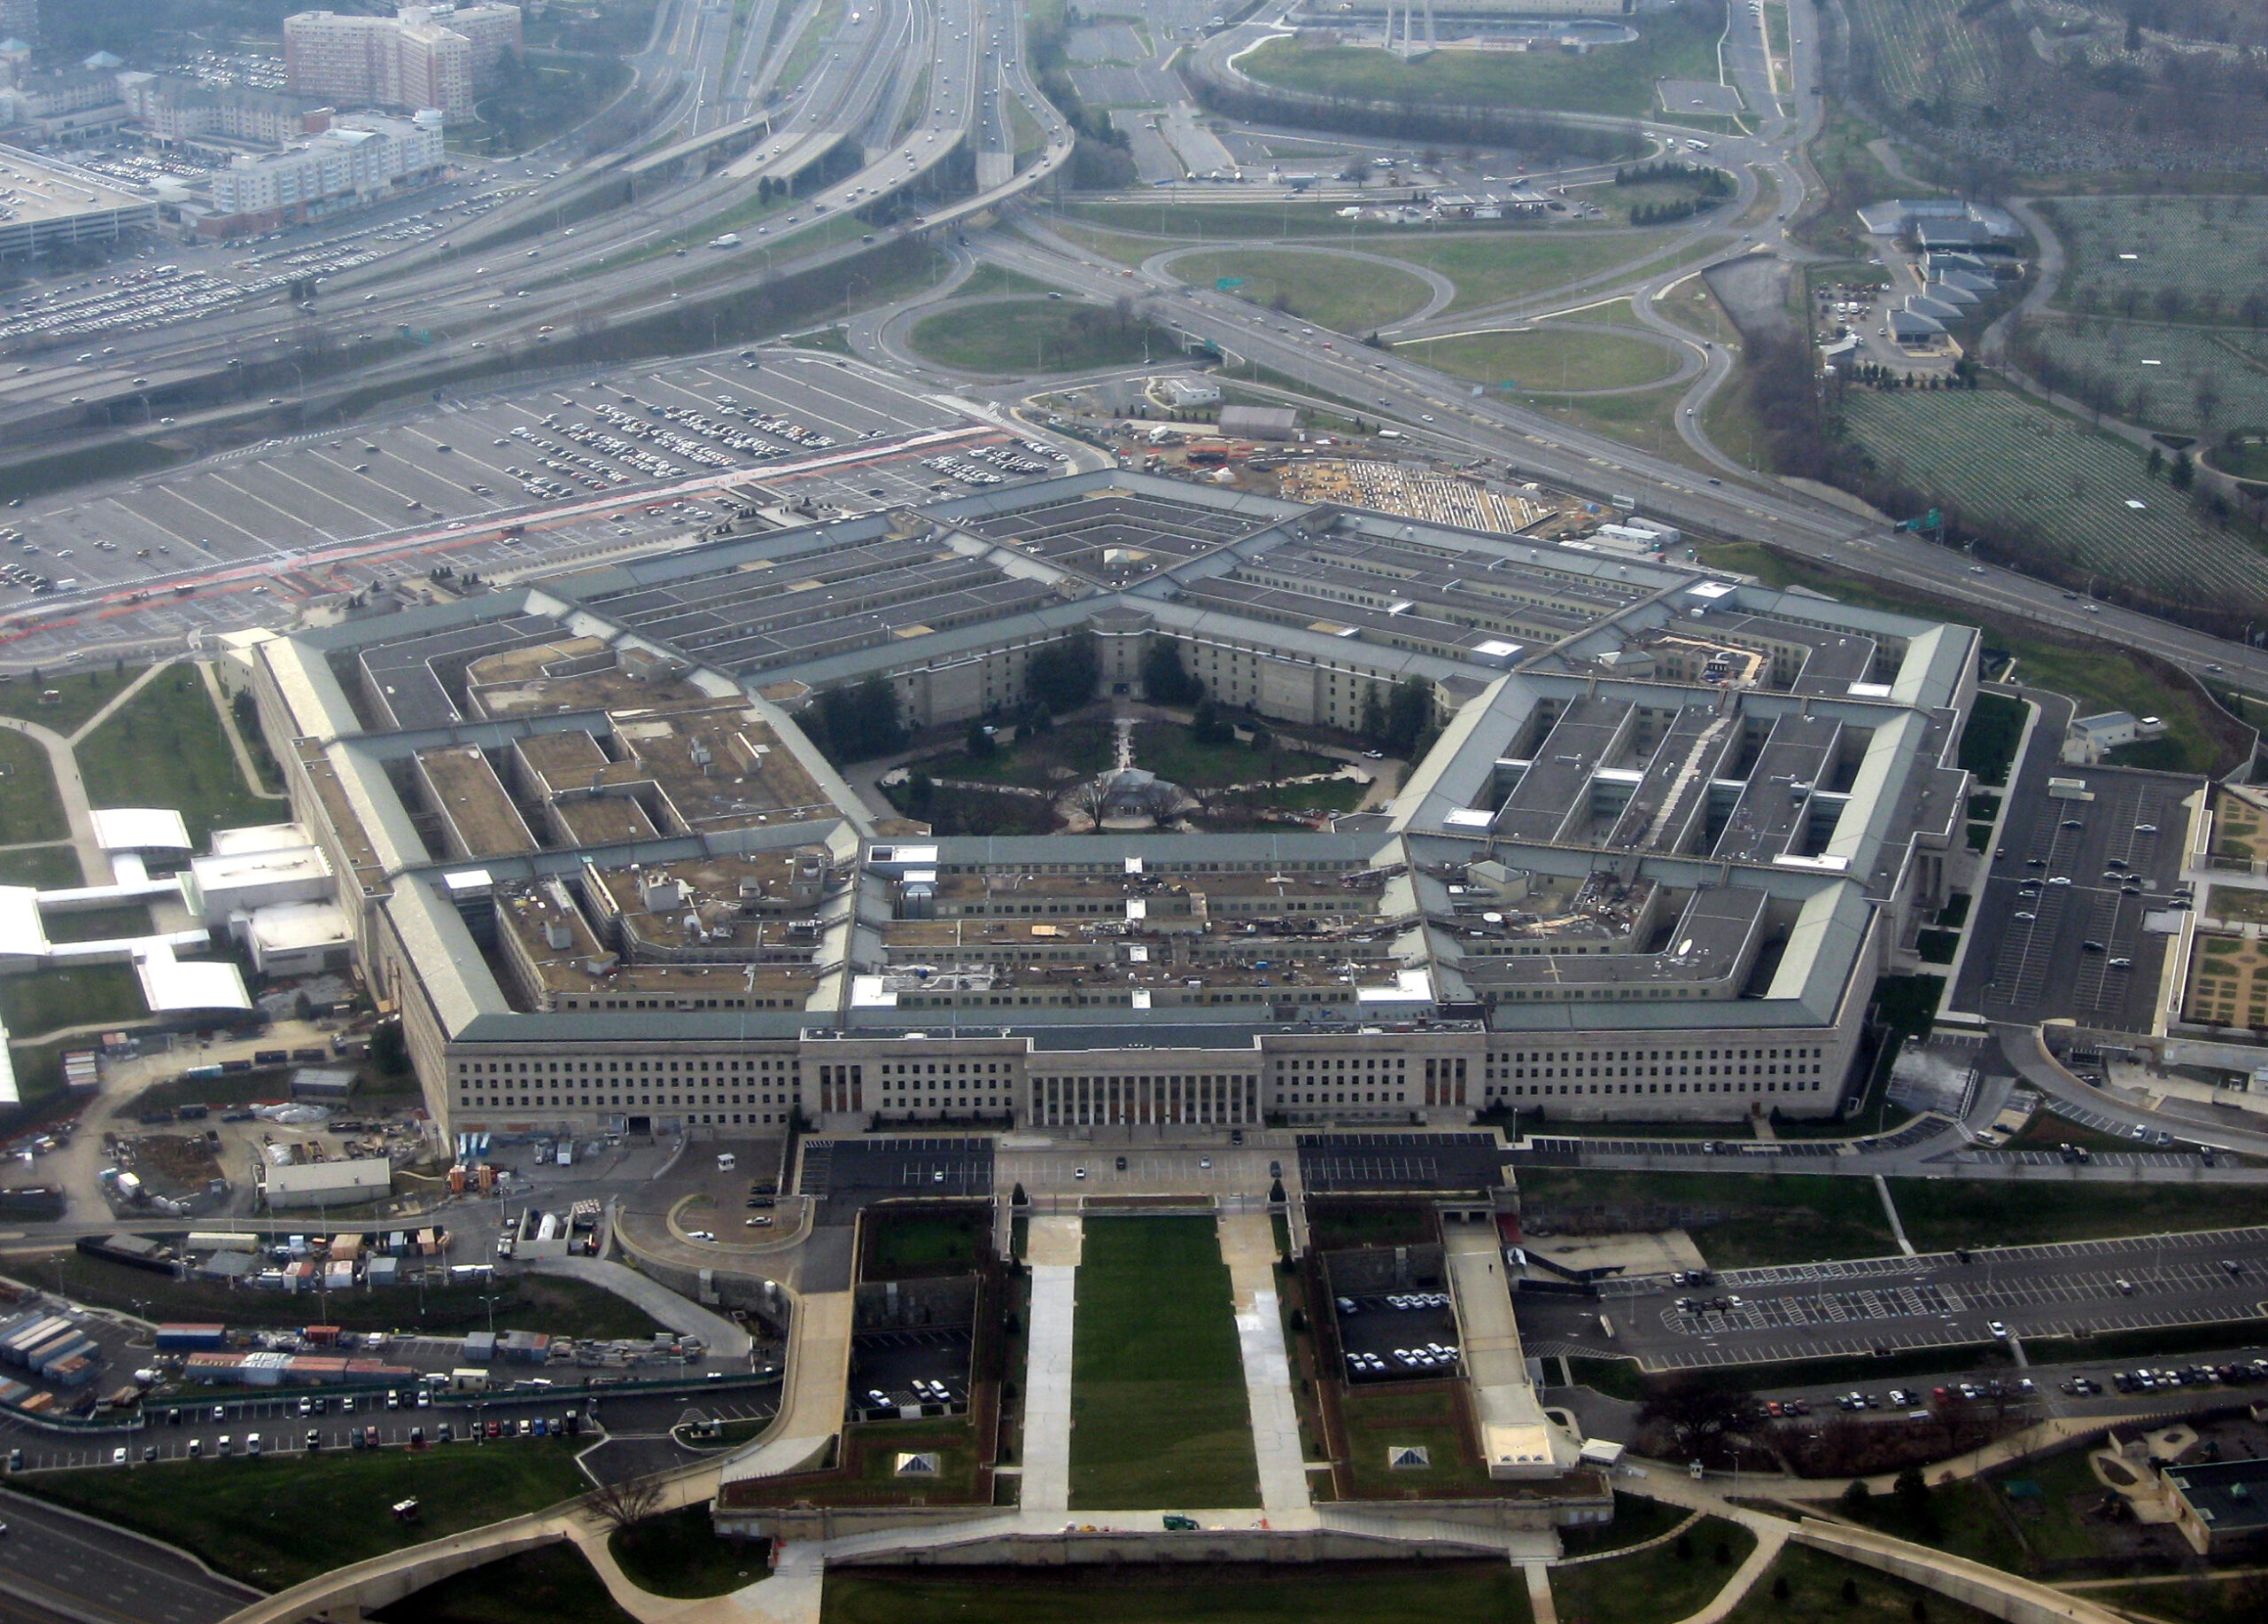 Arial view of the Pentagon